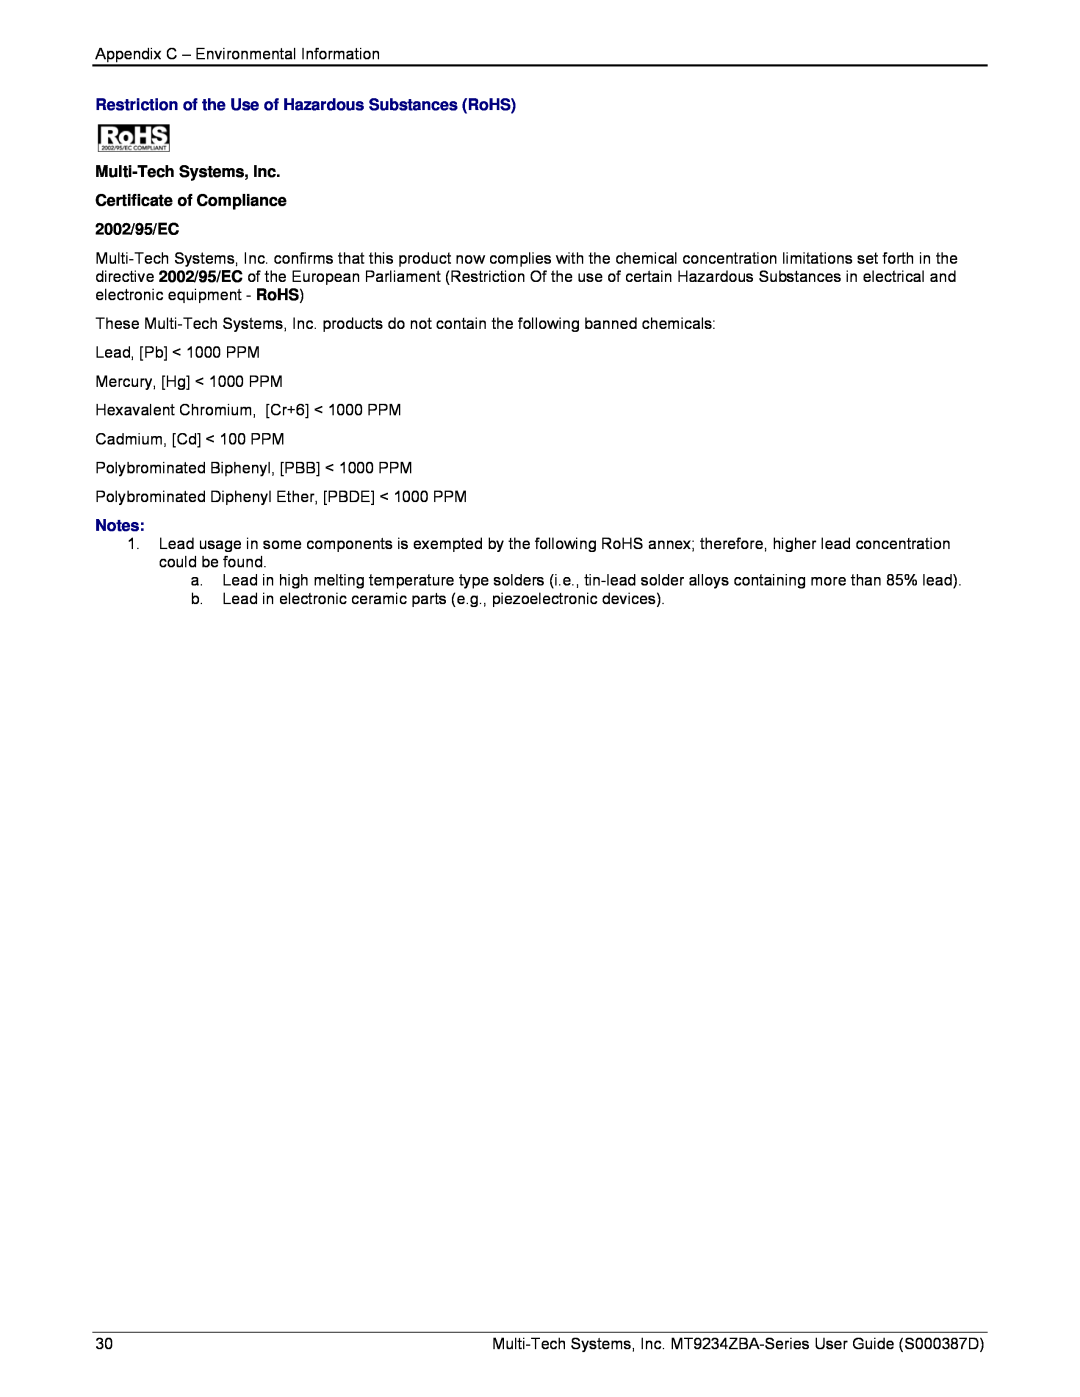 Multi-Tech Systems MT9234ZBA manual Restriction of the Use of Hazardous Substances RoHS 